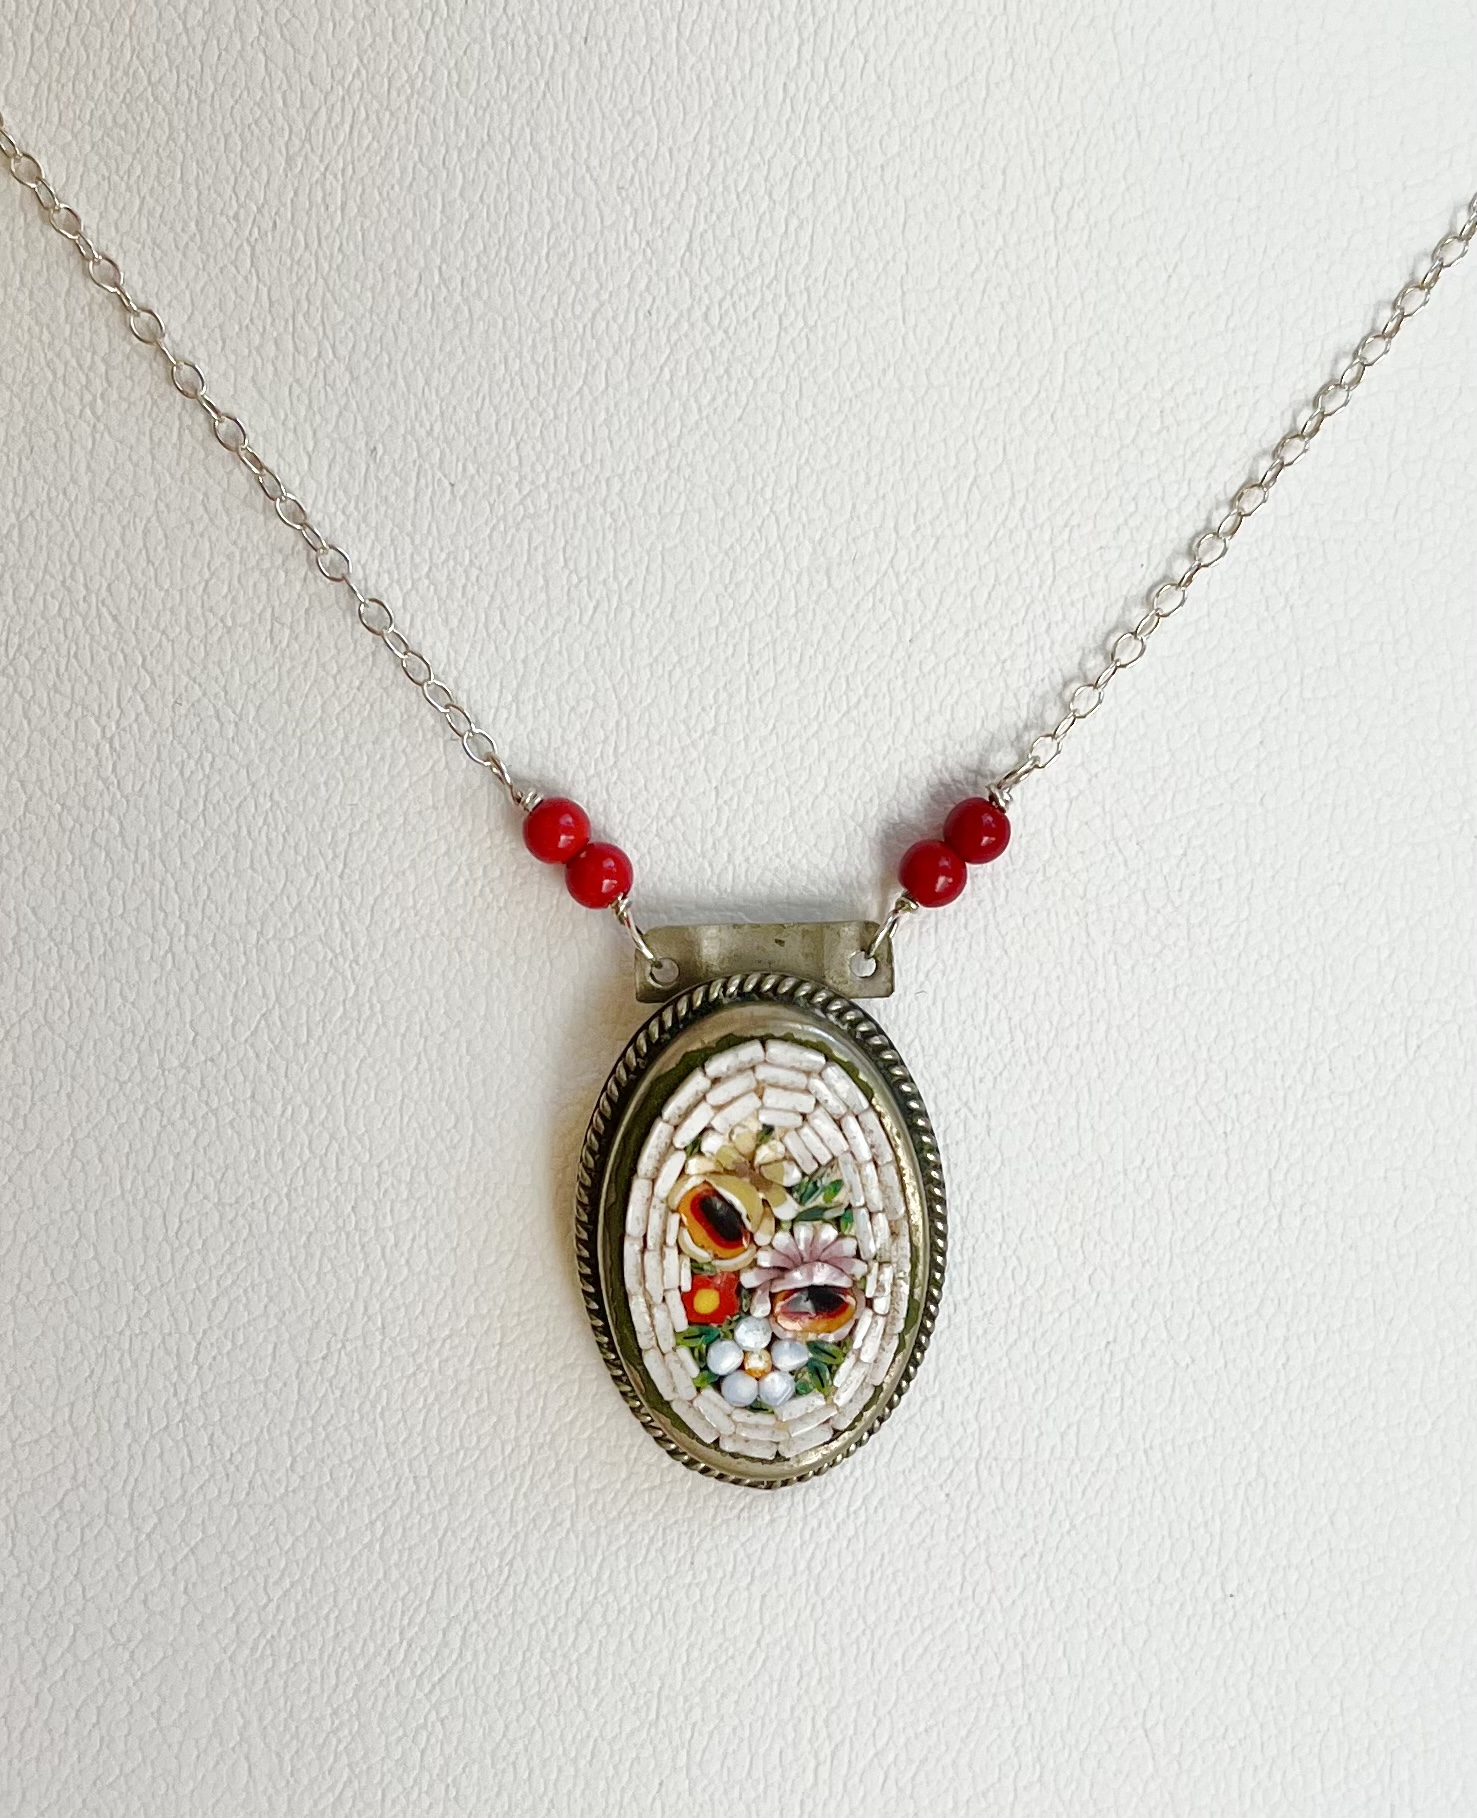 Vintage Photo Locket With Real Flowers Tiny Locket Necklace 